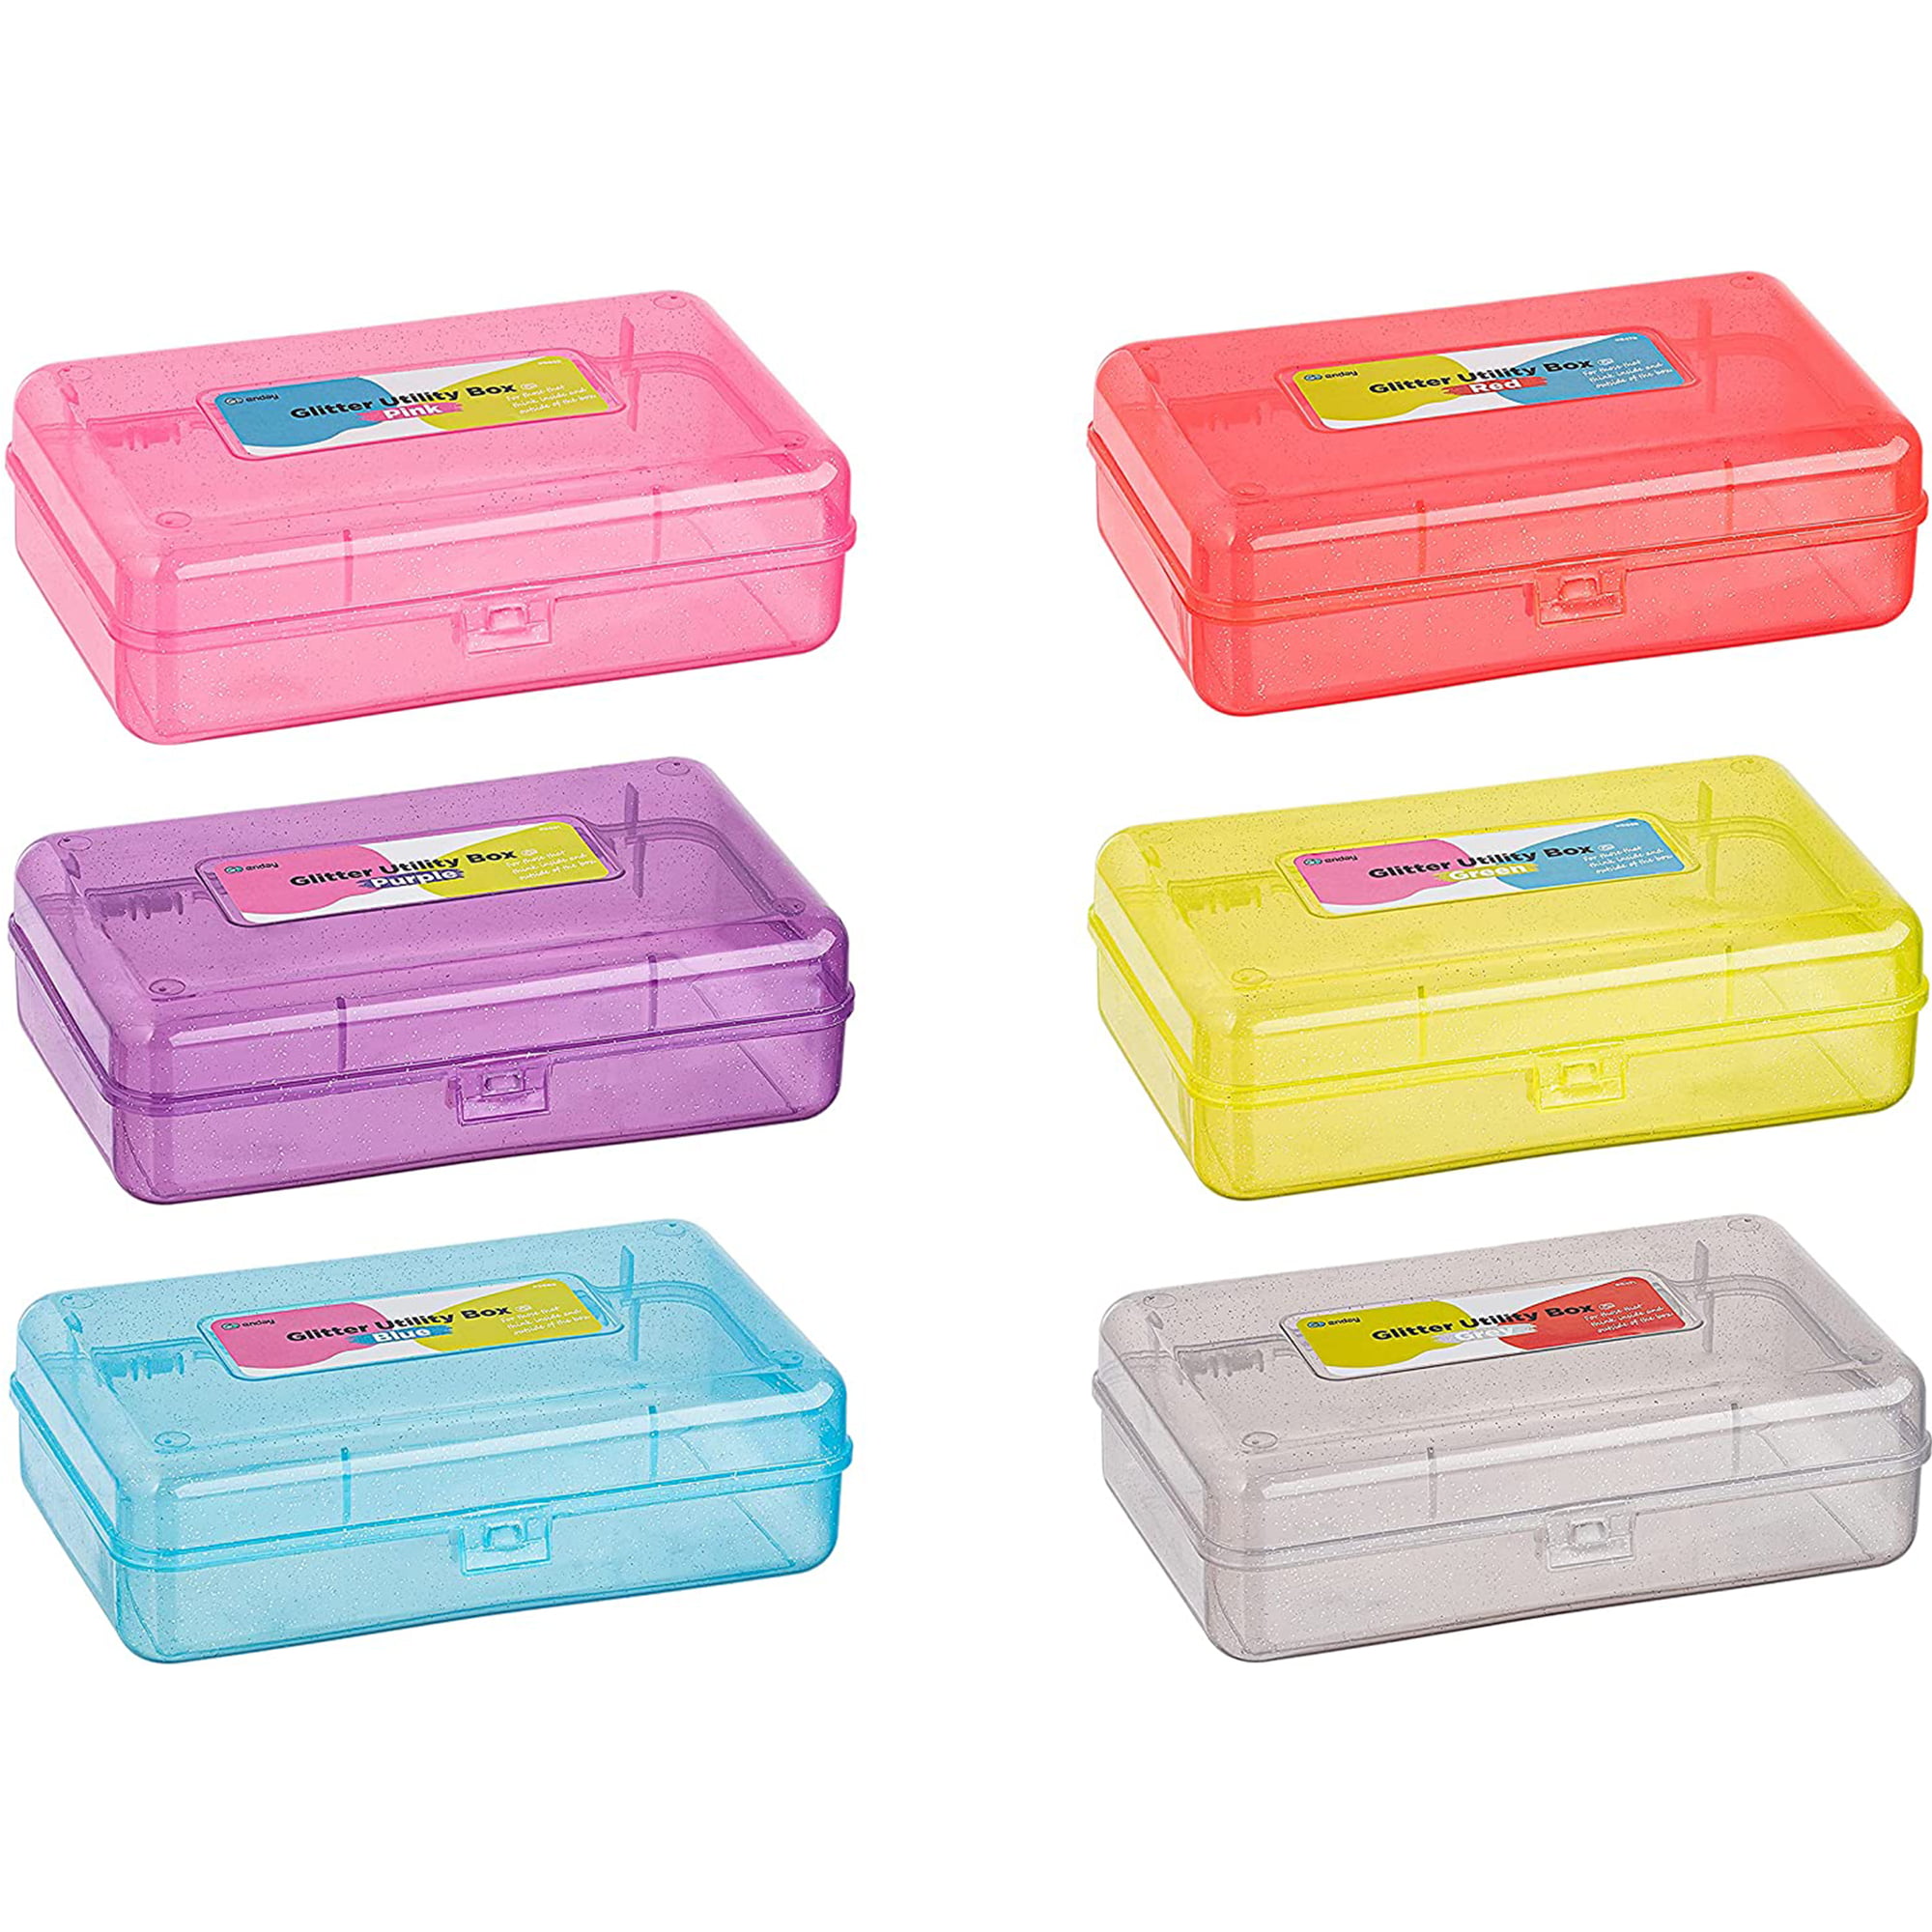 It's Academic Hard Plastic Pencil Box, Pink and Blue